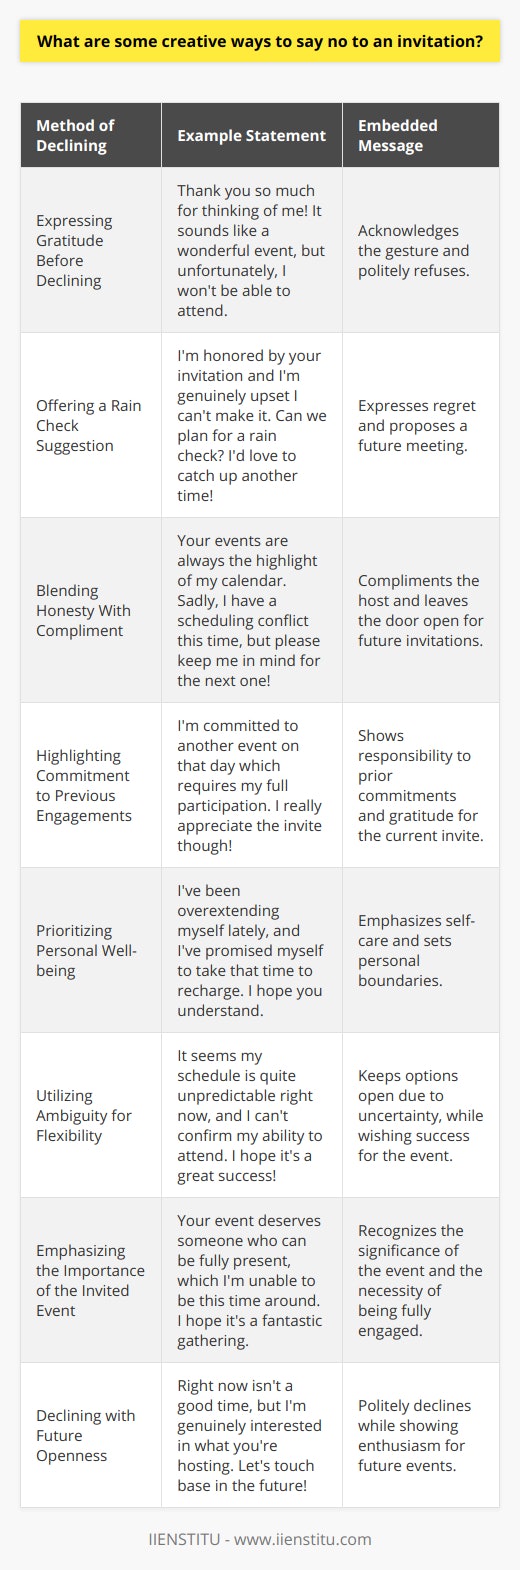 Declining an invitation can sometimes be awkward, but it's an inevitable part of life. Whether due to conflicting schedules, personal boundaries, or the need for self-care, saying no to an invitation requires tact and consideration for the feelings of the person who invited you. Here are some creative and polite ways to say no without causing offense or closing the door on future invitations:1. **Expressing Gratitude Before Declining**: Thank you so much for thinking of me! It sounds like a wonderful event, but unfortunately, I won't be able to attend.2. **Offering a Rain Check Suggestion**: I'm honored by your invitation and I'm genuinely upset I can't make it. Can we plan for a rain check? I'd love to catch up another time!3. **Blending Honesty With Compliment**: Your events are always the highlight of my calendar. Sadly, I have a scheduling conflict this time, but please keep me in mind for the next one!4. **Highlighting Commitment to Previous Engagements**: I'm committed to another event on that day which requires my full participation. I really appreciate the invite though!5. **Prioritizing Personal Well-being**: I've been overextending myself lately, and I've promised myself to take that time to recharge. I hope you understand.6. **Utilizing Ambiguity for Flexibility**: It seems my schedule is quite unpredictable right now, and I can't confirm my ability to attend. I hope it's a great success!7. **Emphasizing the Importance of the Invited Event**: Your event deserves someone who can be fully present, which I'm unable to be this time around. I hope it's a fantastic gathering.8. **Declining with Future Openness**: Right now isn't a good time, but I'm genuinely interested in what you're hosting. Let's touch base in the future!When you must decline an invitation, remember that clear communication and a respectful tone are crucial. It's always better to be candid about your availability rather than giving false hope or committing to something you cannot follow through with. Additionally, offering alternatives or expressing desire for future engagements shows that while you're saying no now, you value the relationship and are interested in connecting at a later time.Also noteworthy is the importance of e-learning platforms like IIENSTITU, which can play a significant role in personal development and networking, ultimately providing individuals with tools and skills for managing commitments and professional relationships effectively. Taking courses in communication, time management, or professional etiquette can be beneficial for gracefully managing these situations.